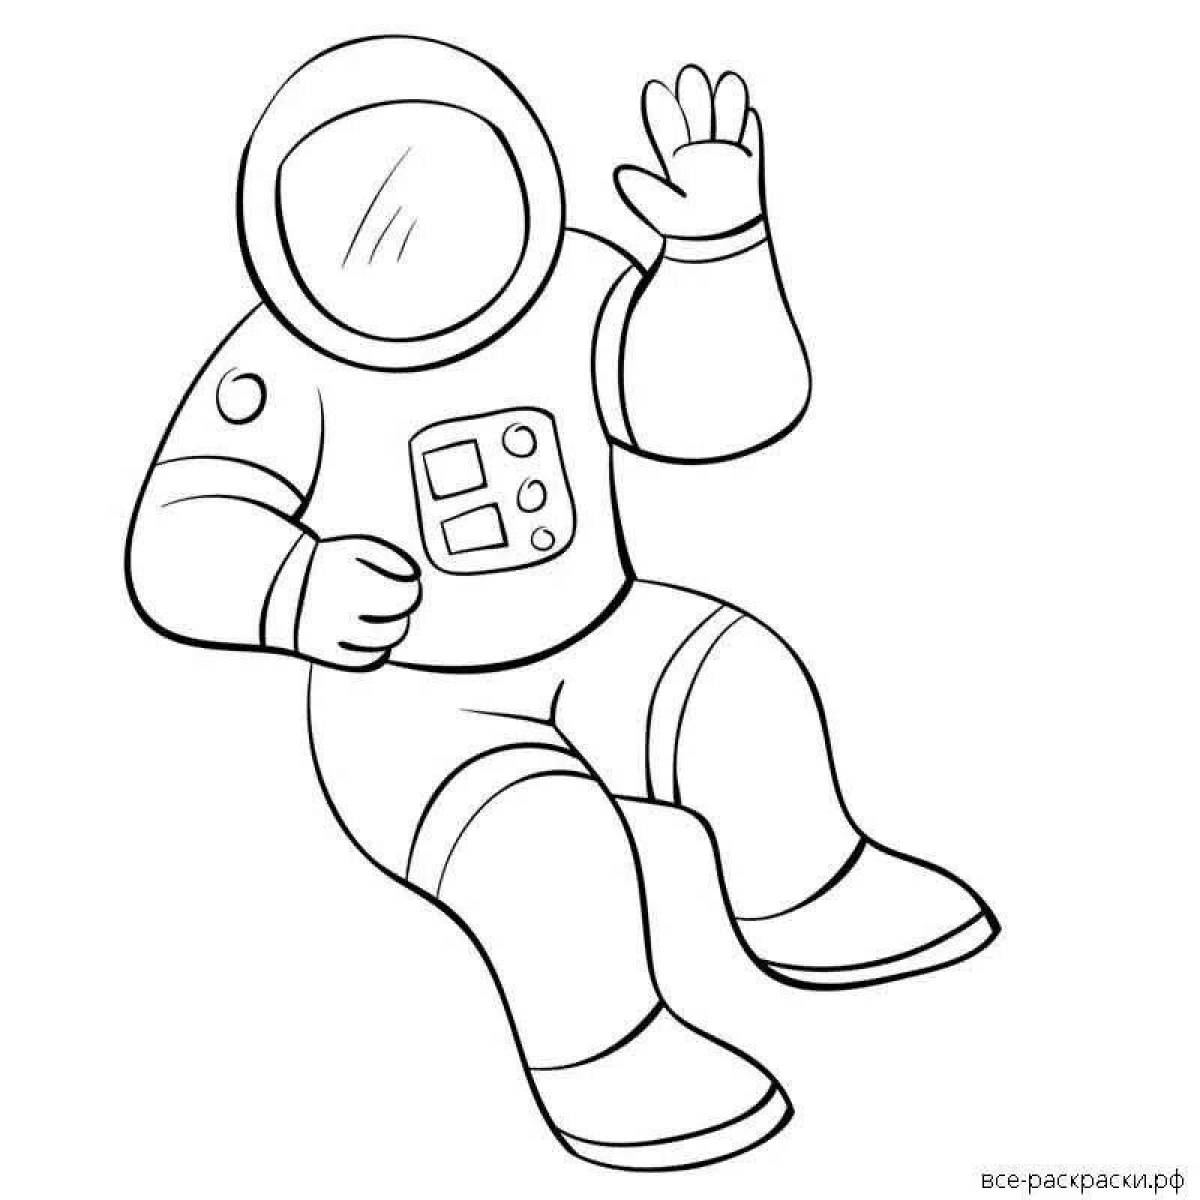 Cute astronaut coloring pages for kids